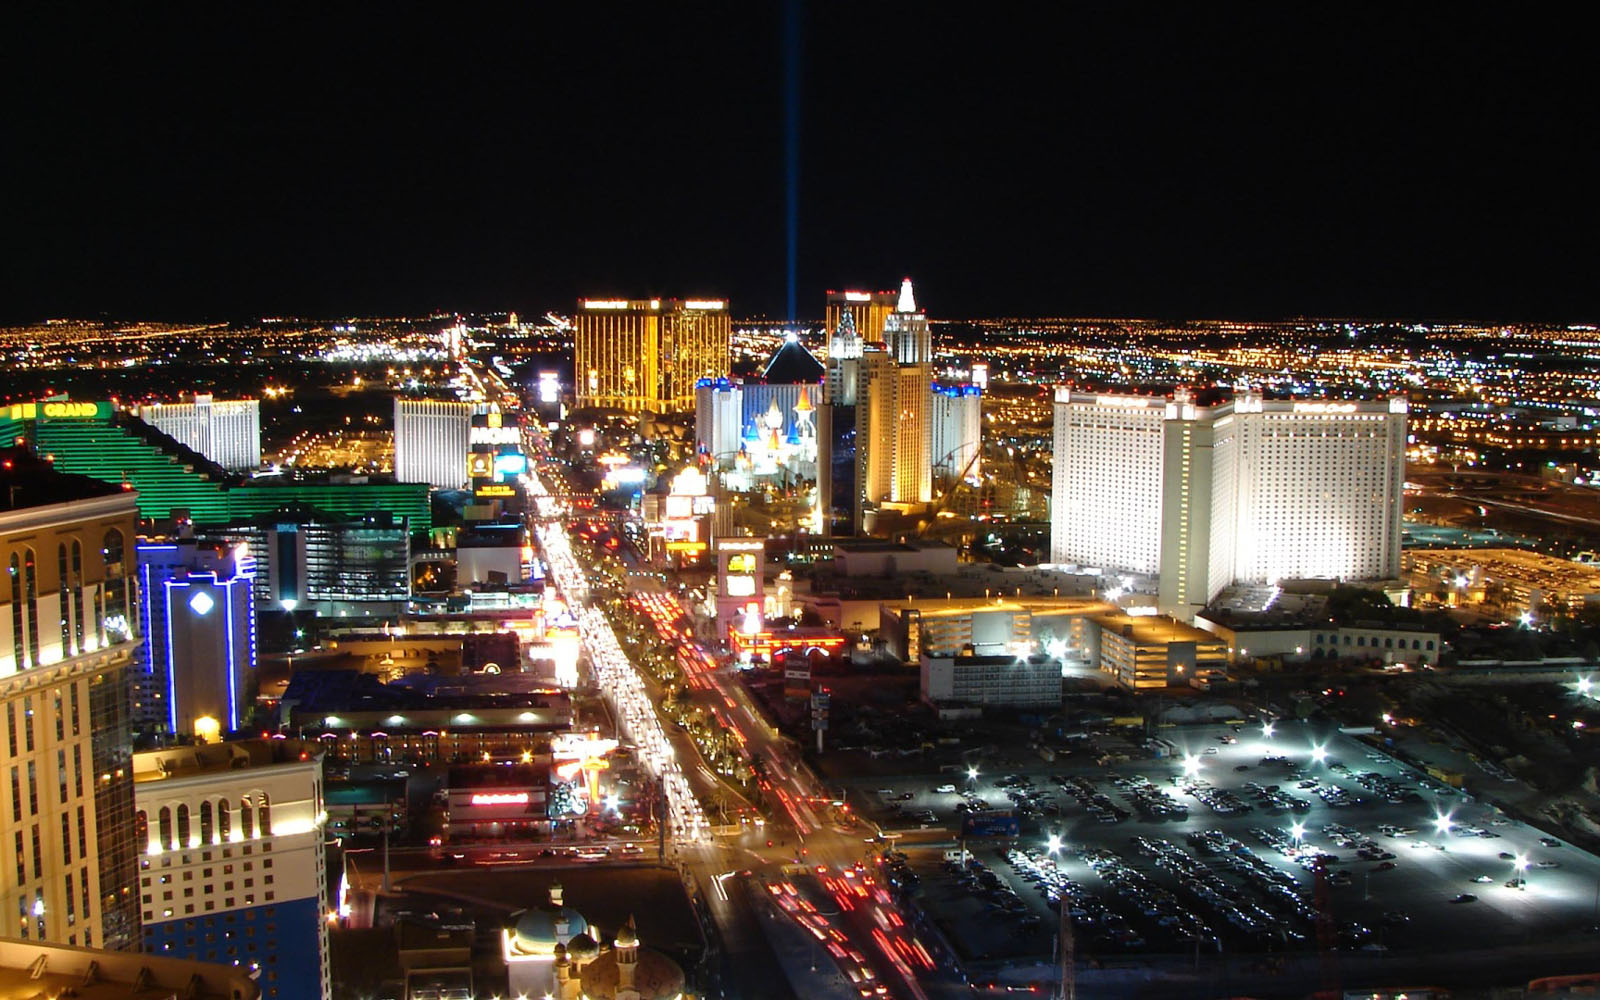 Tag Las Vegas Wallpapers Backgrounds Photos Images andPictures for 1600x1000